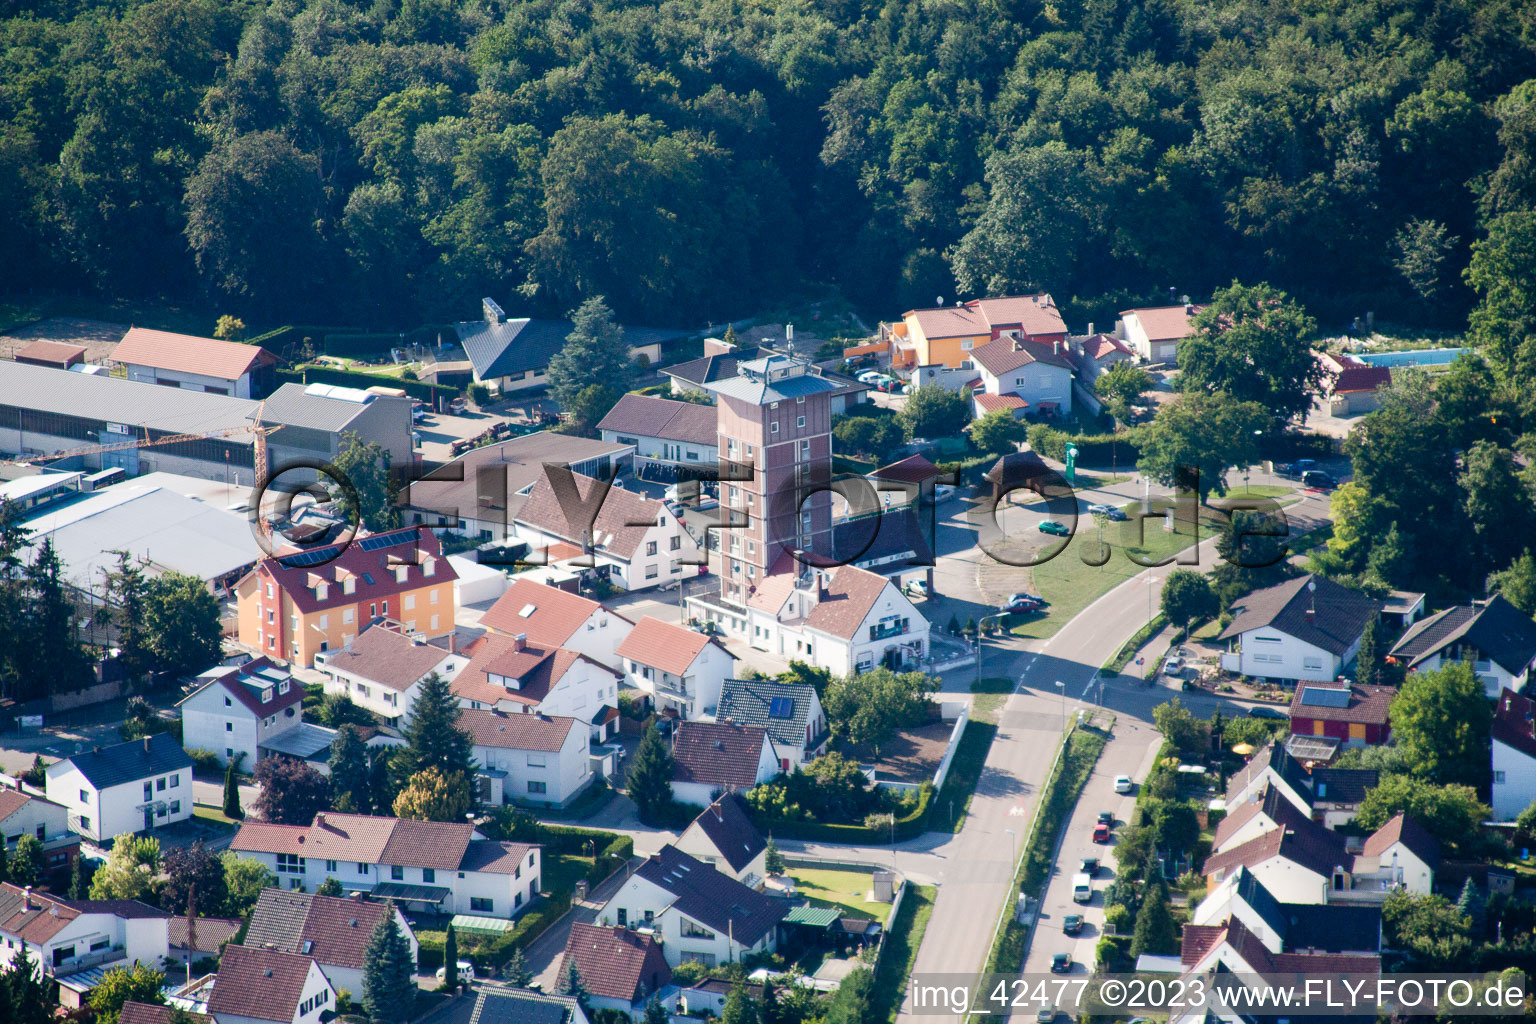 Oblique view of Ludovici skyscraper in Jockgrim in the state Rhineland-Palatinate, Germany